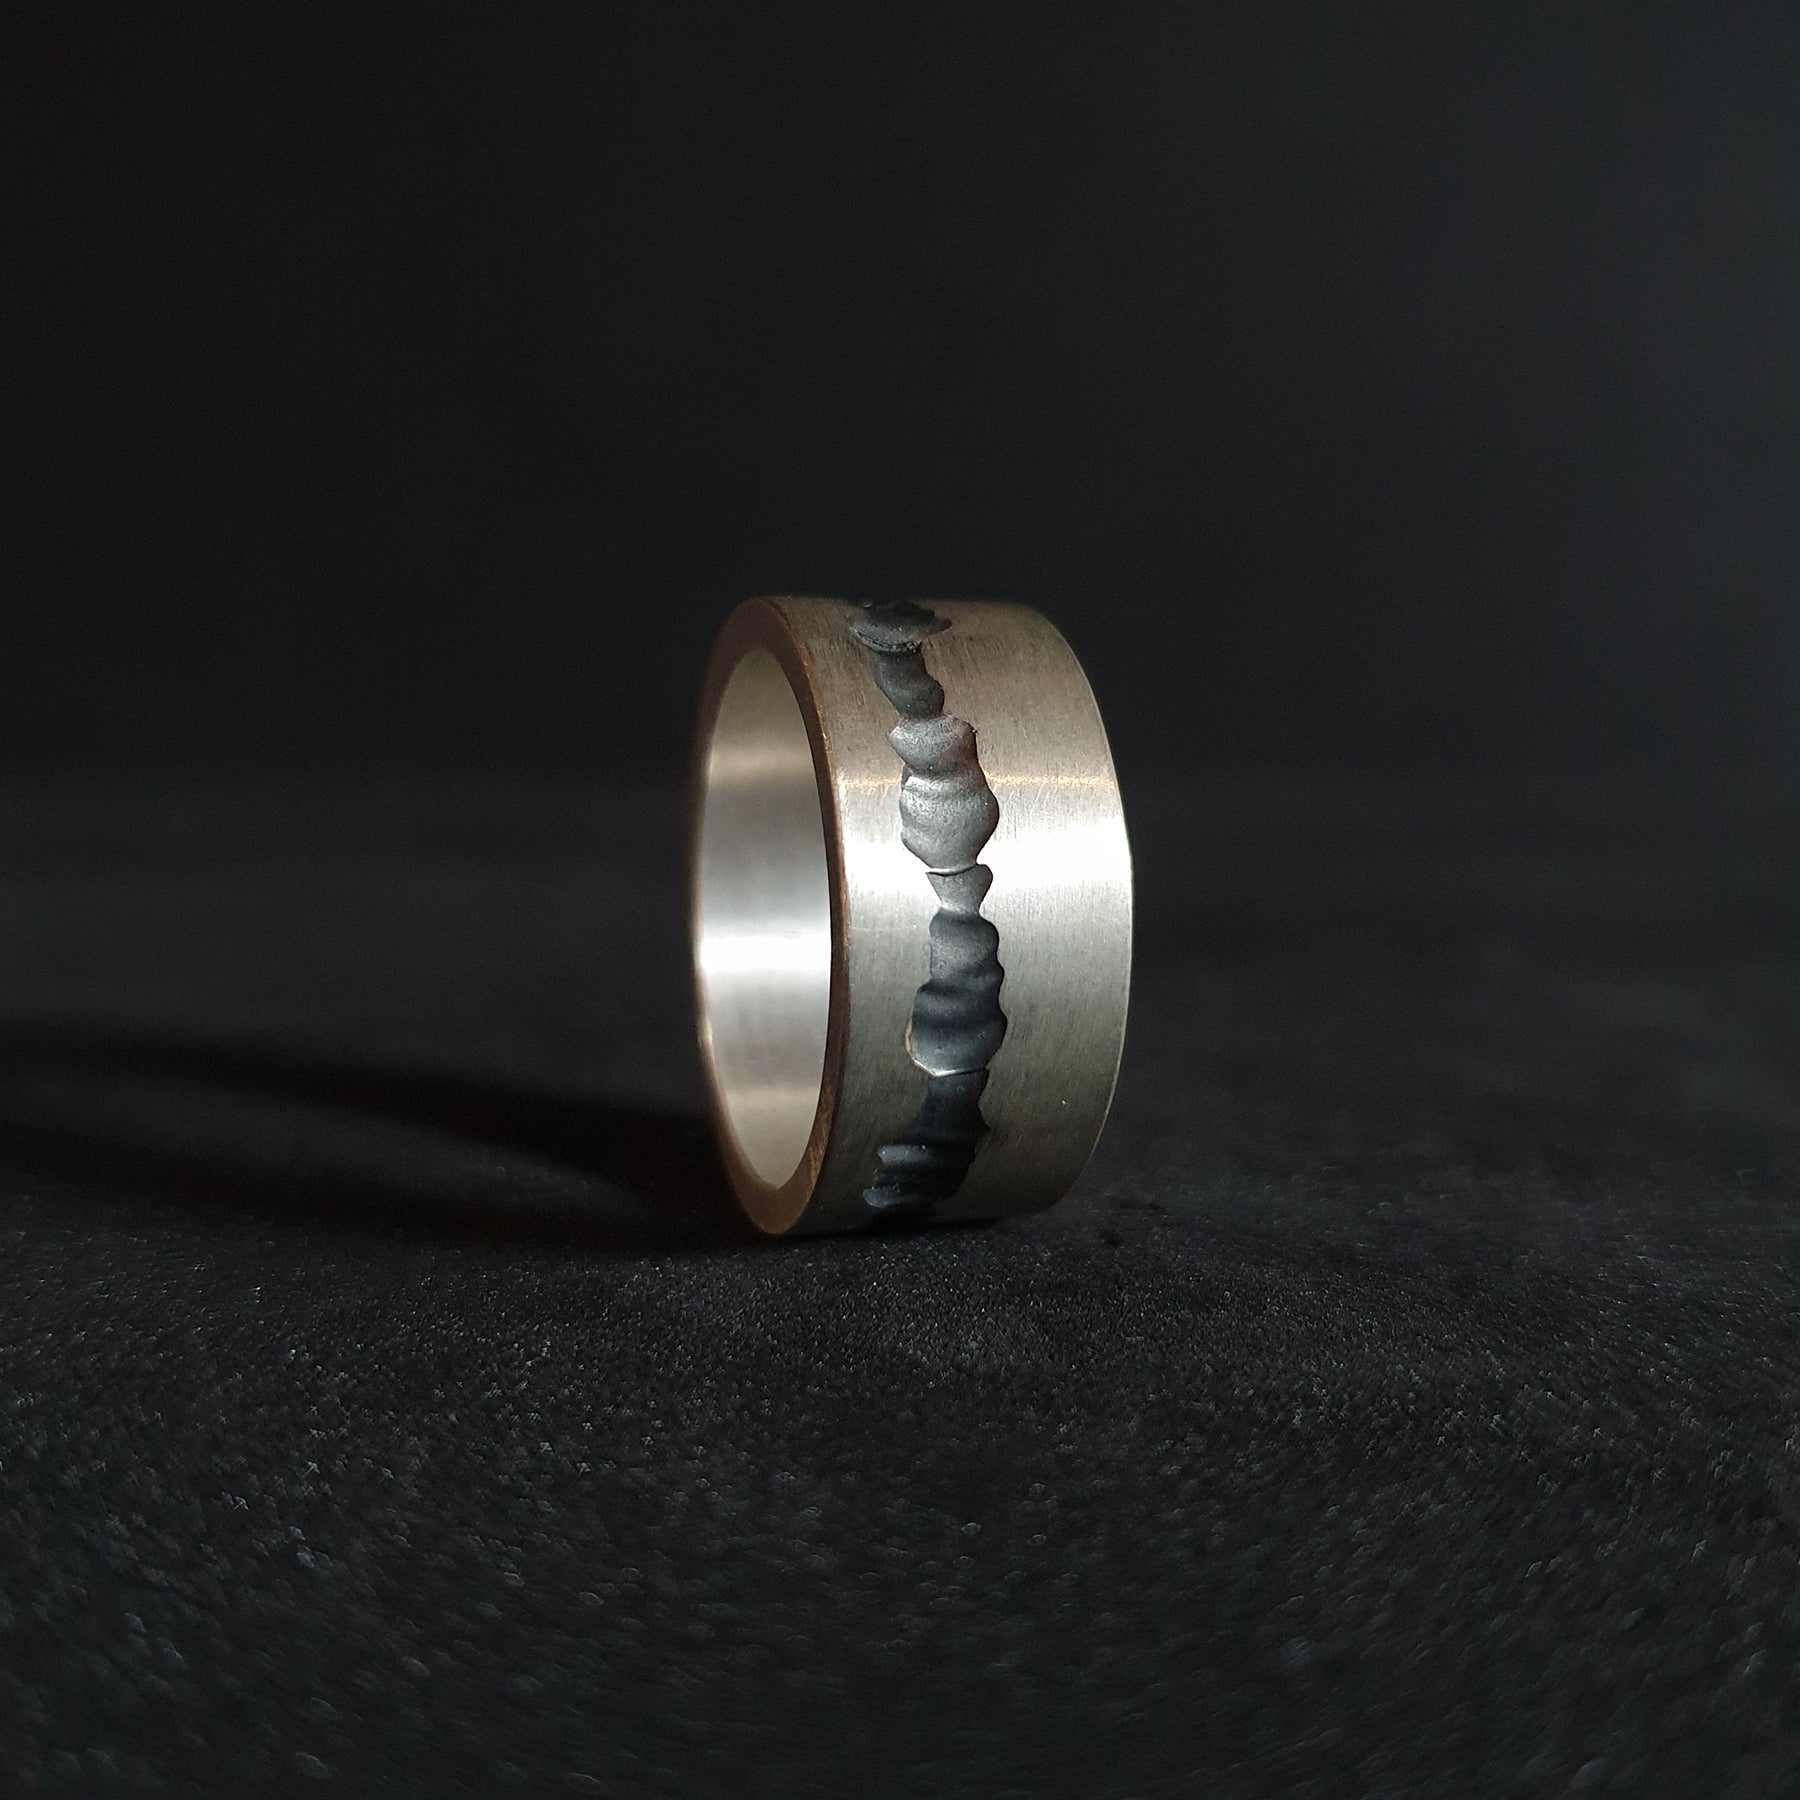 Ring from the textuRes collection